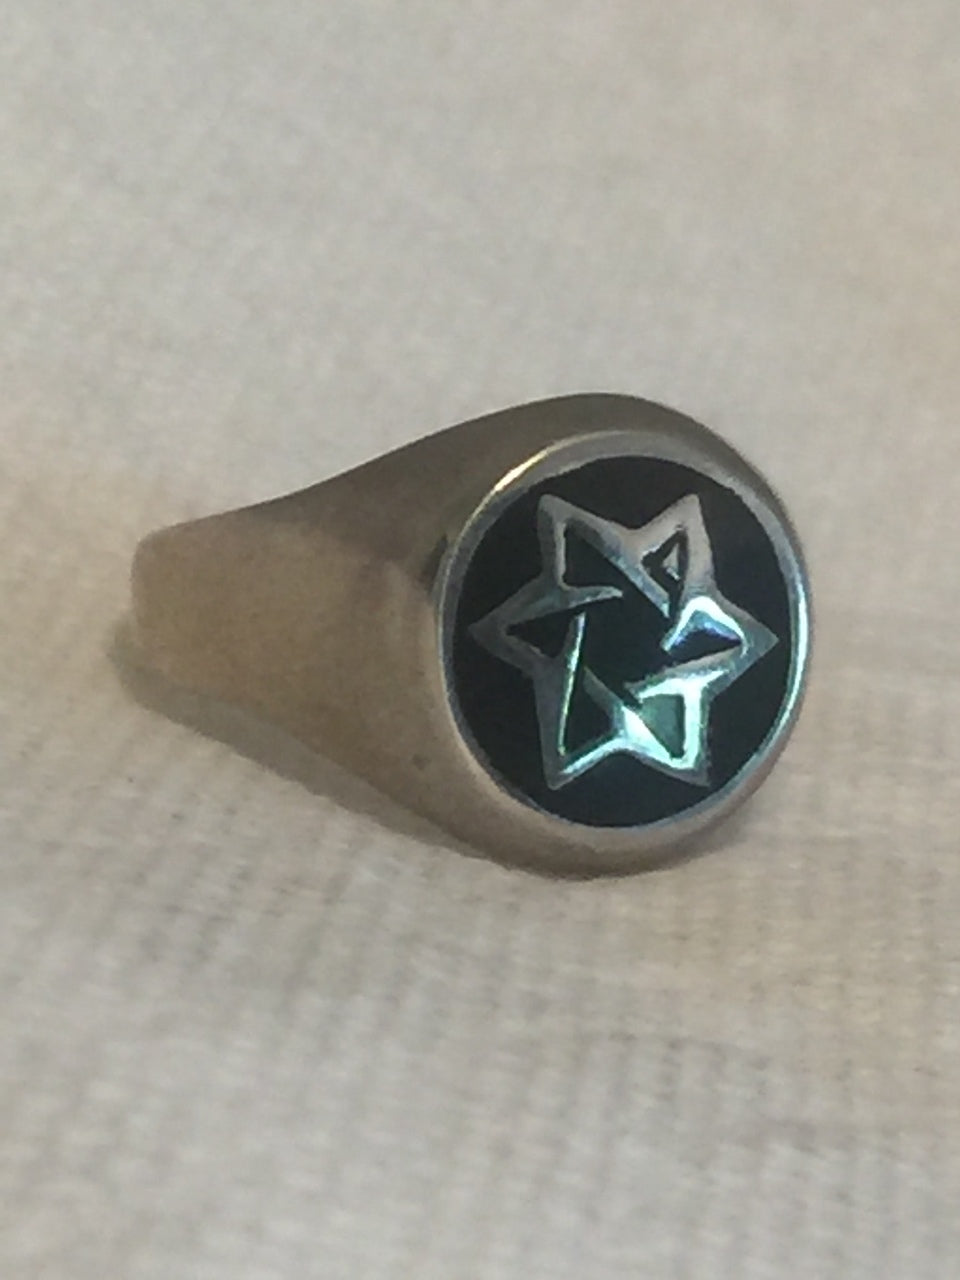 Vintage Sterling Silver Star Ring  Size 9.5 11.3g Mexico Men Women